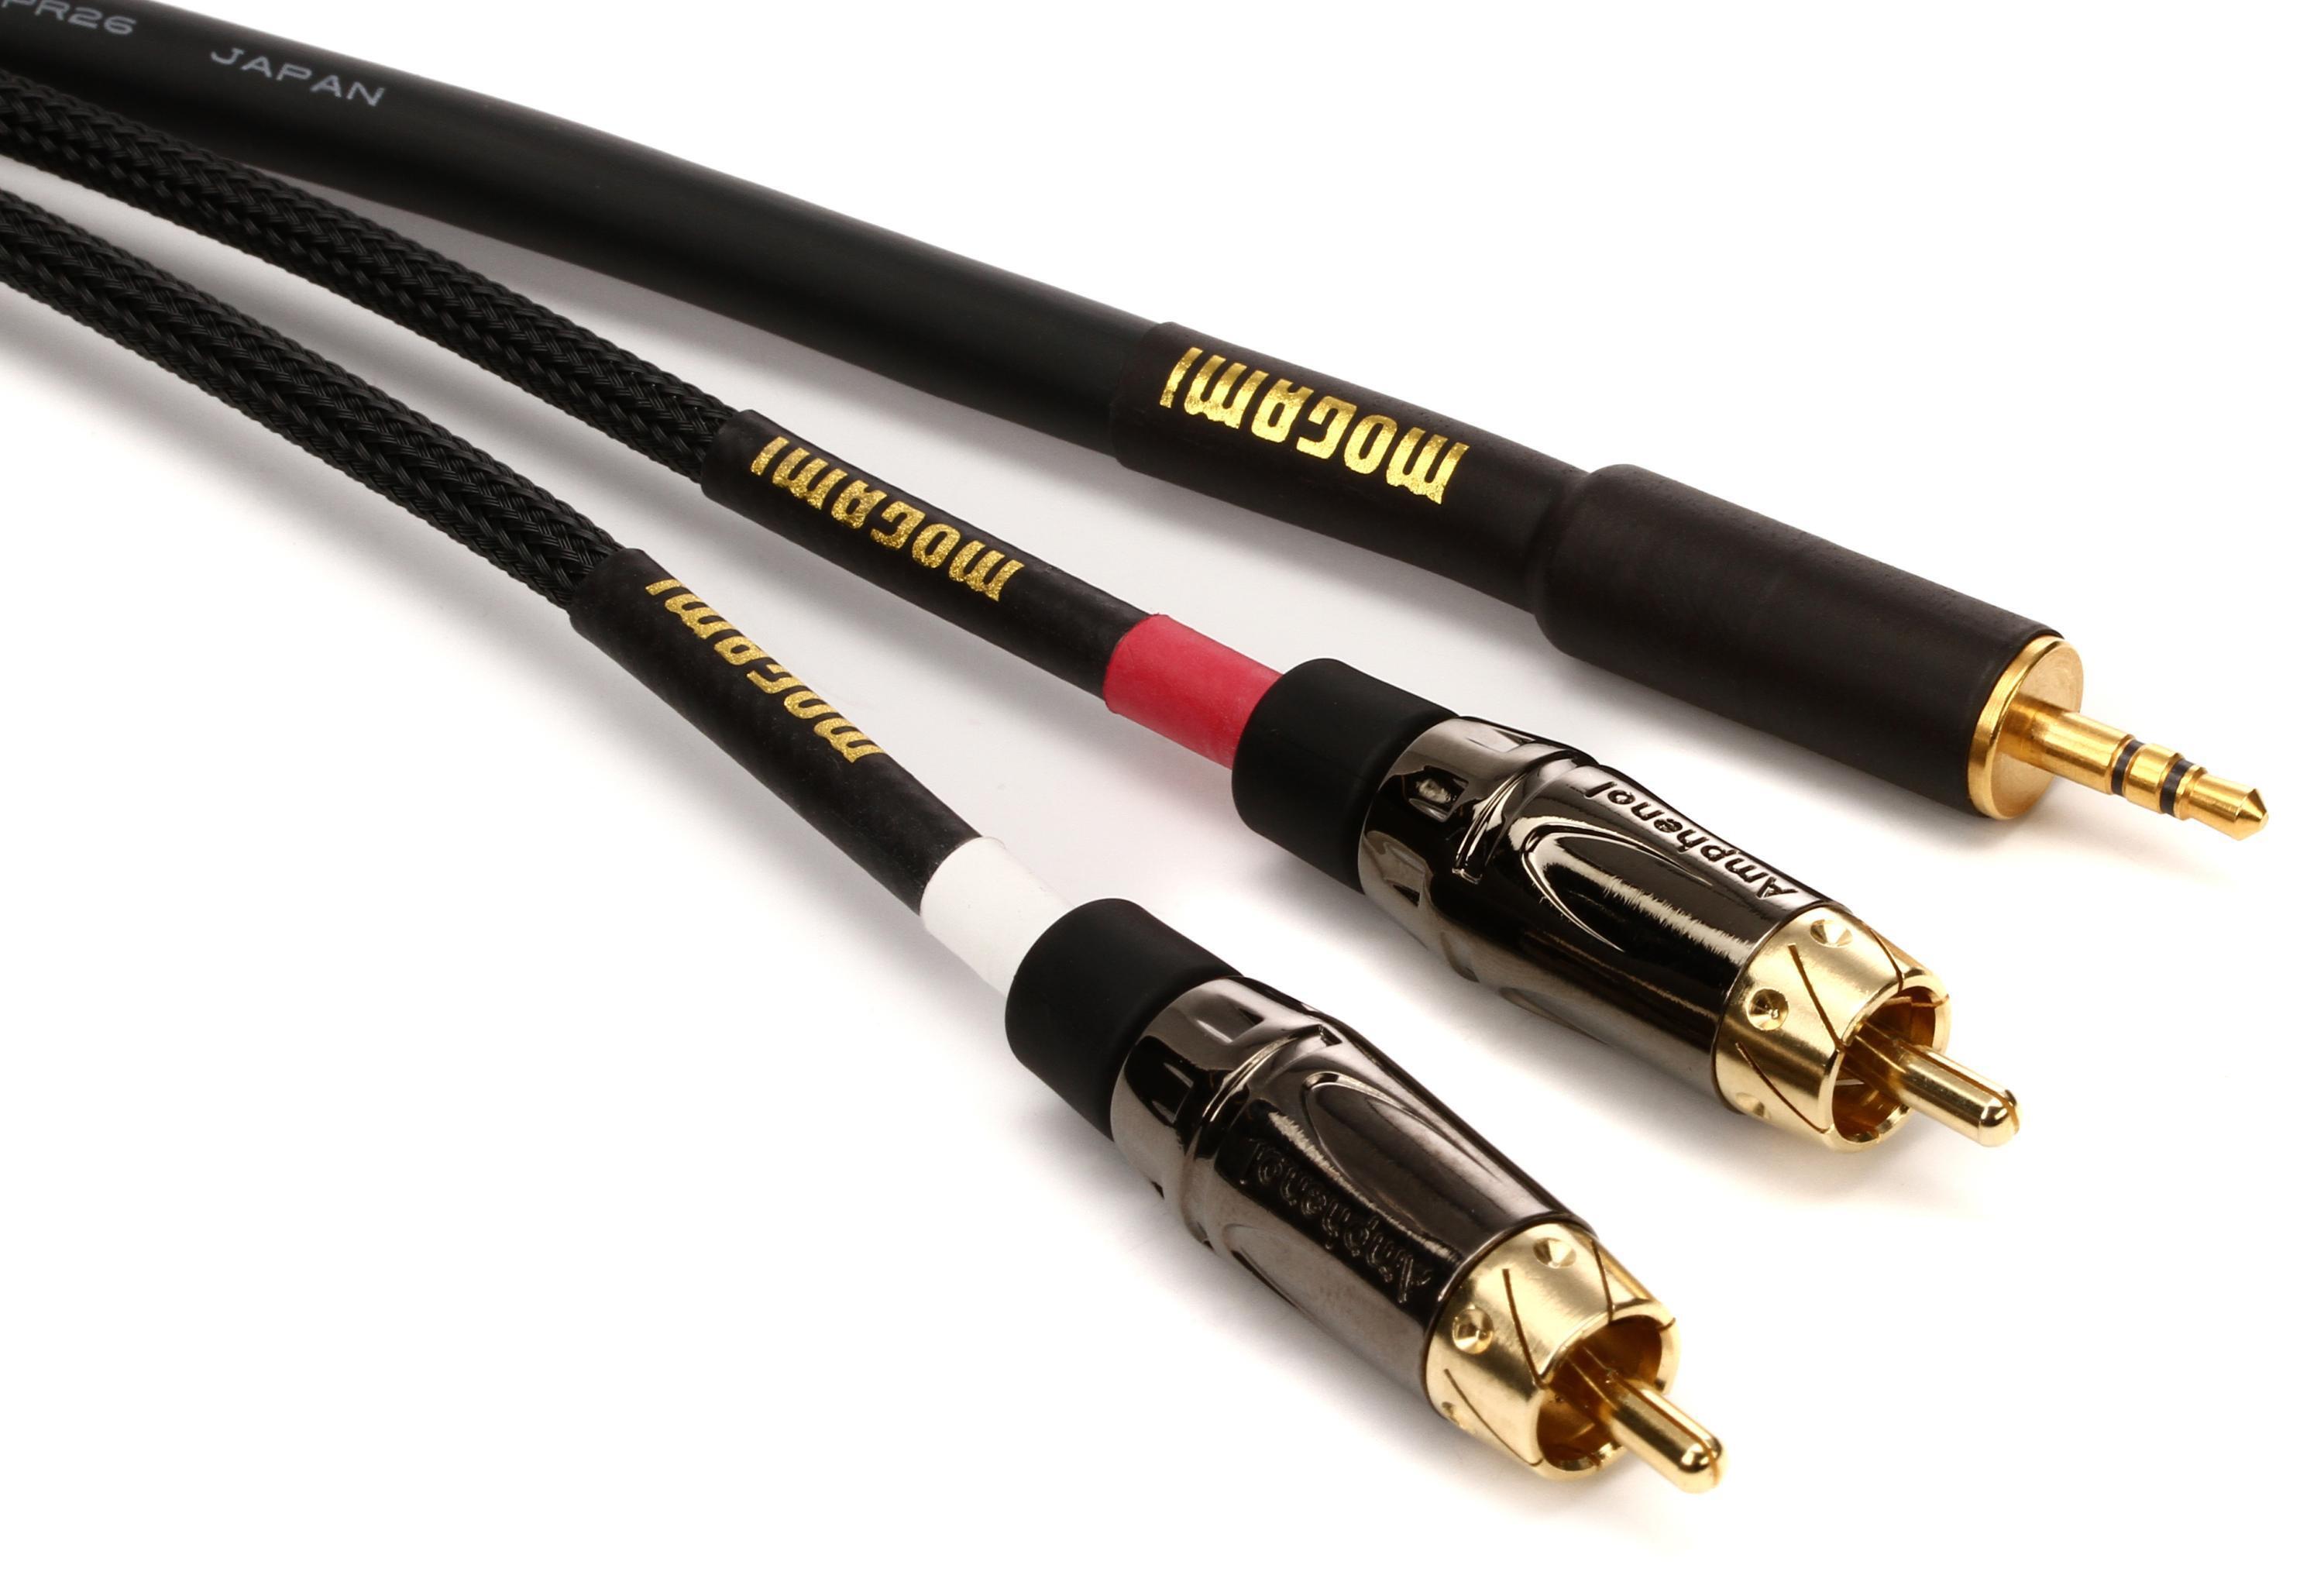 3.5mm Mono Male to RCA Male Cable, 3.5mm Audio Auxiliary Jack on One End  and RCA Audio Jack on Other End, 6 Feet, Black